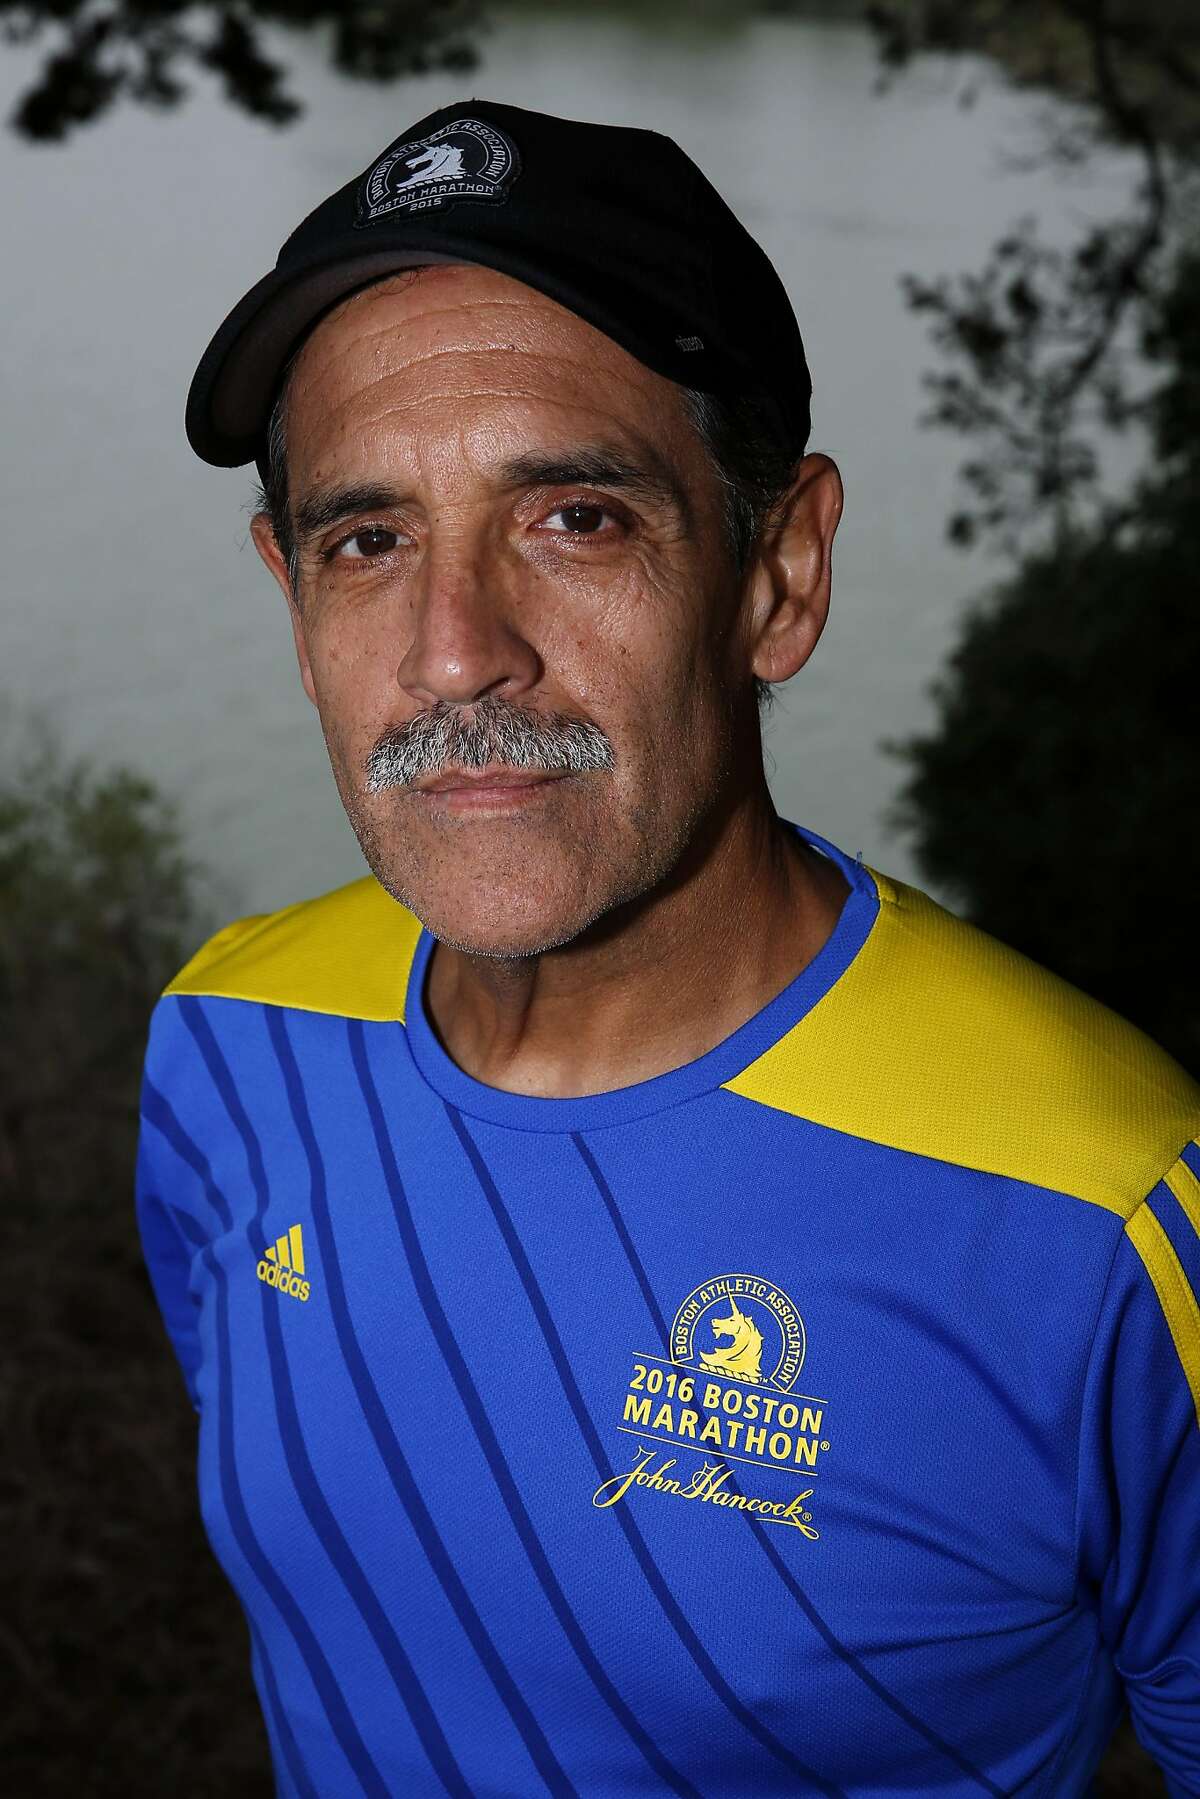 Leo Rosales poses for a photograph before a race near Lake Merced in San Francisco, California, on Thursday, July 28, 2016.